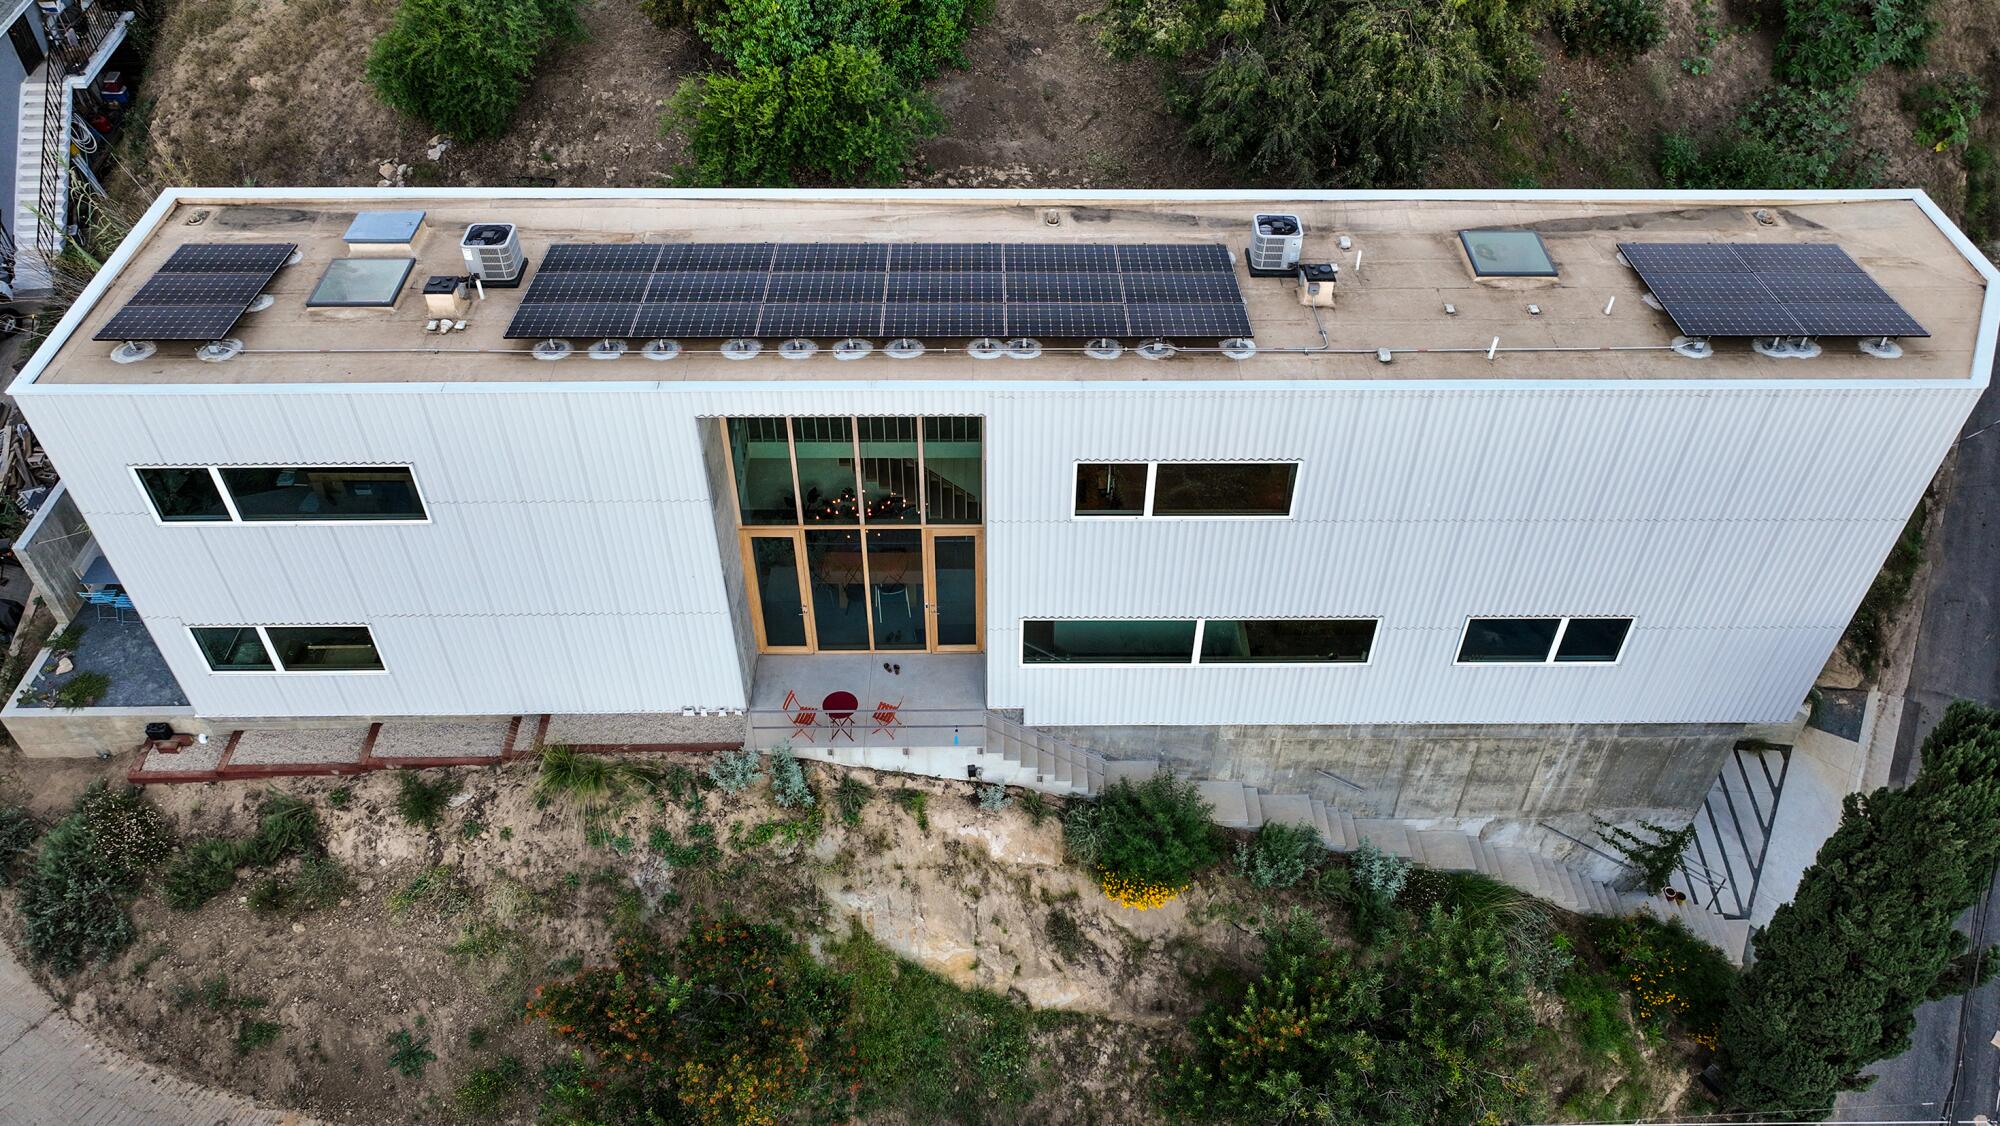 From above, you see the tall, skinny and long home with big vertical windows and solar panels on the roof. 